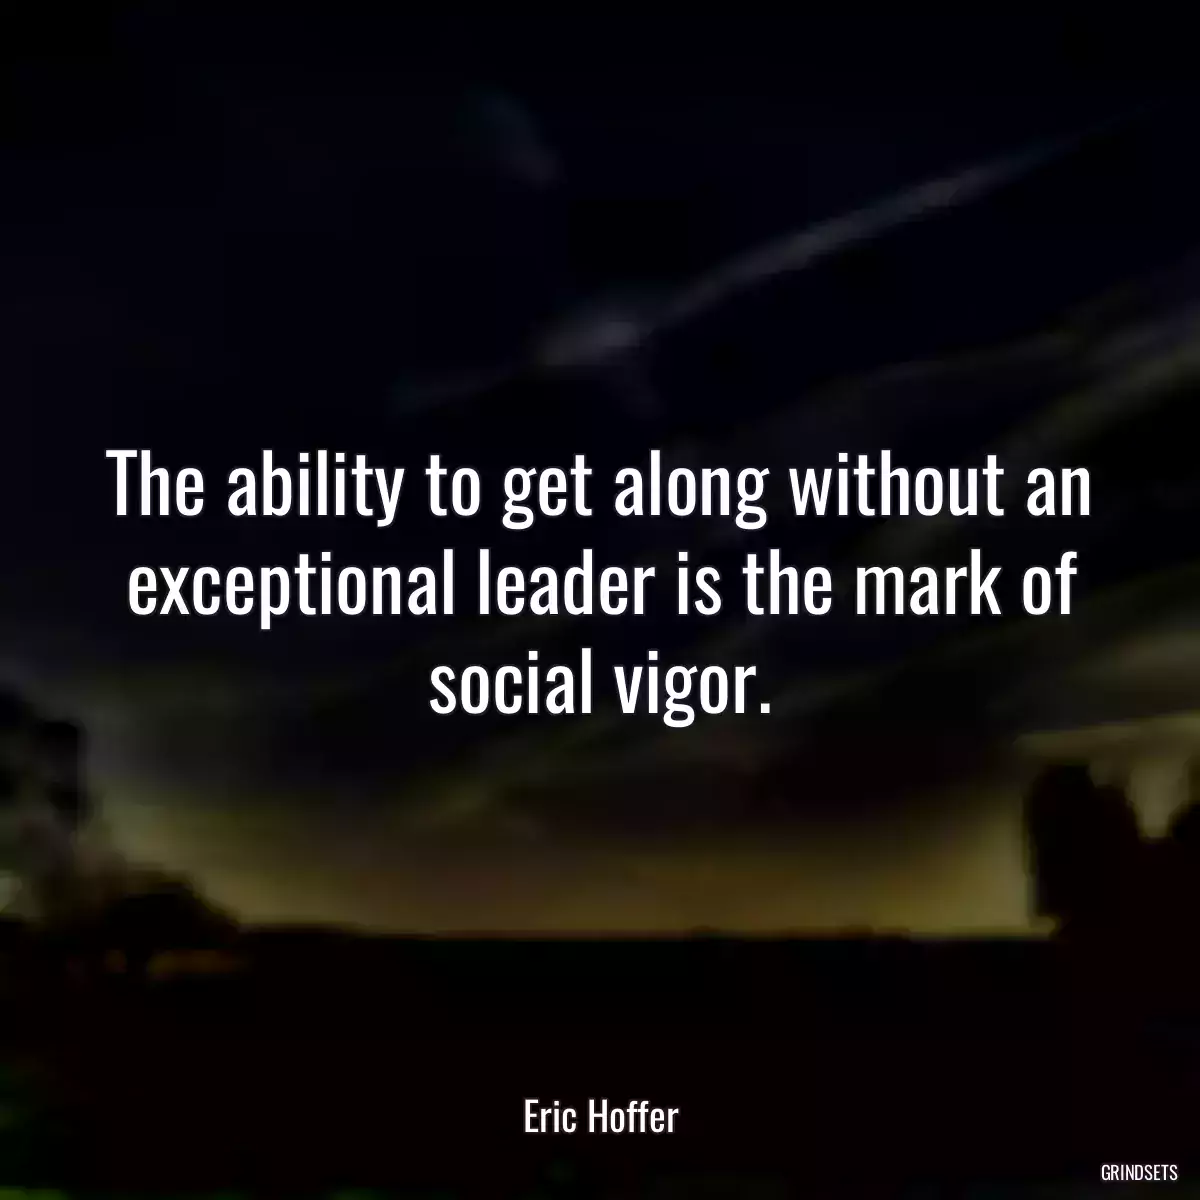 The ability to get along without an exceptional leader is the mark of social vigor.